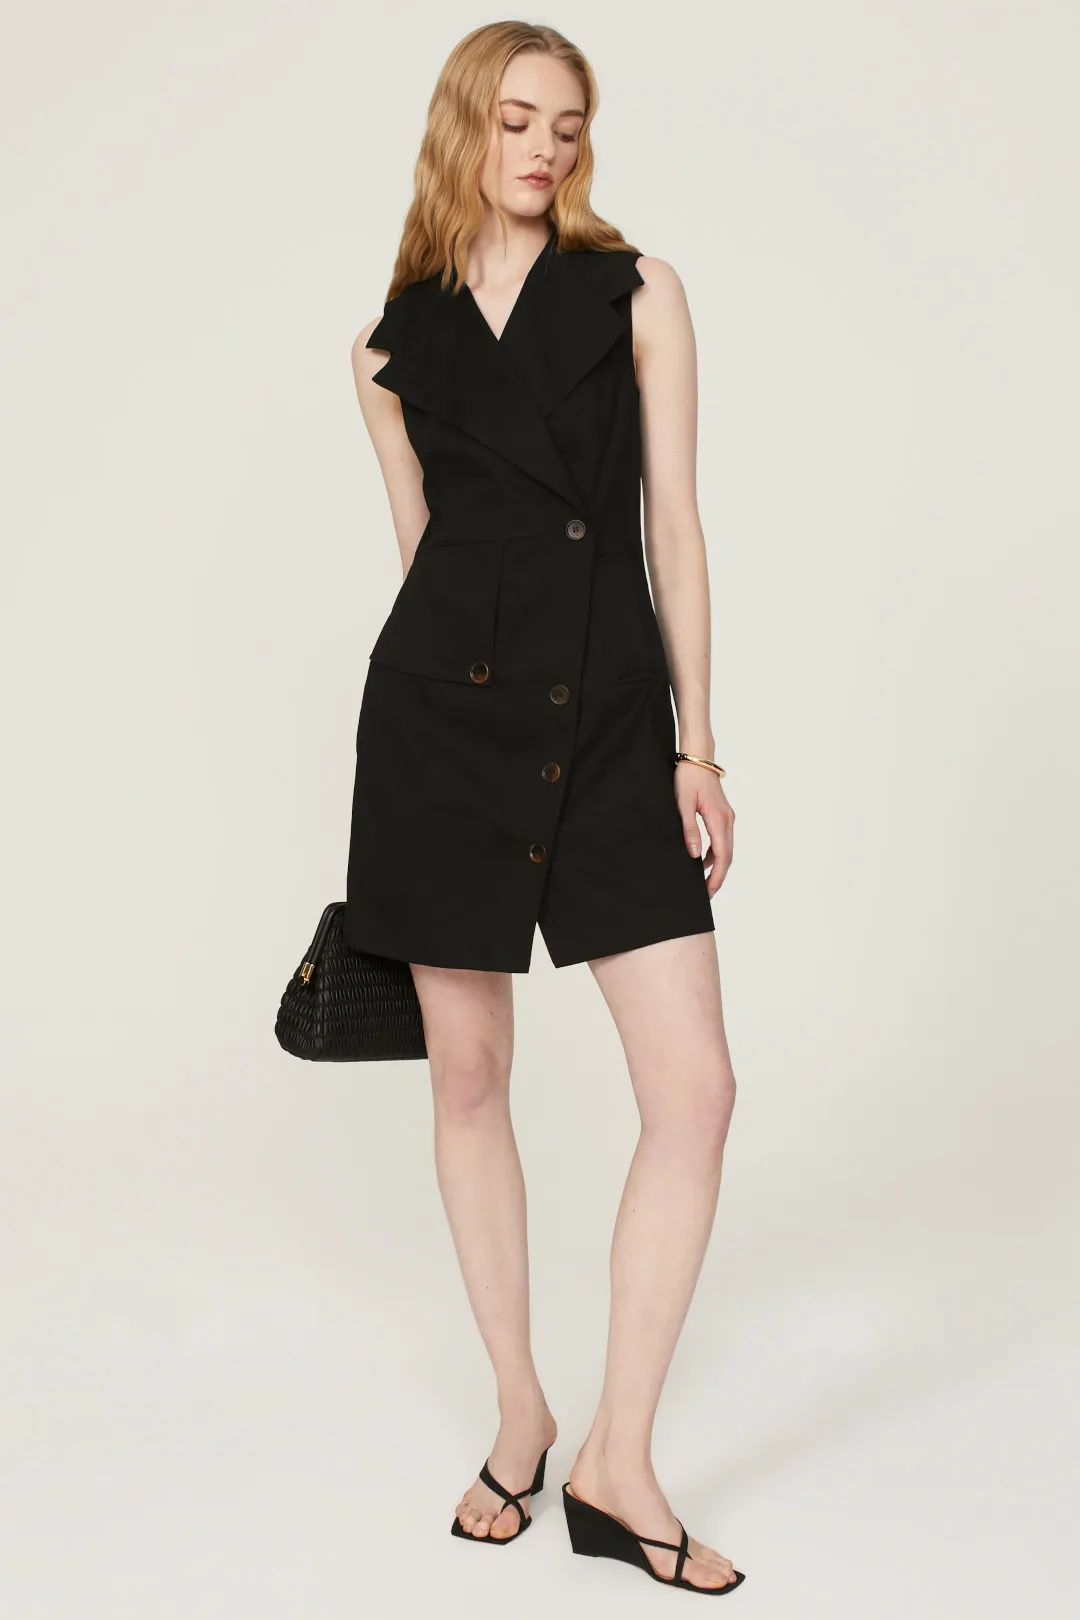 Black Trench Wrap Dress | Rent the Runway